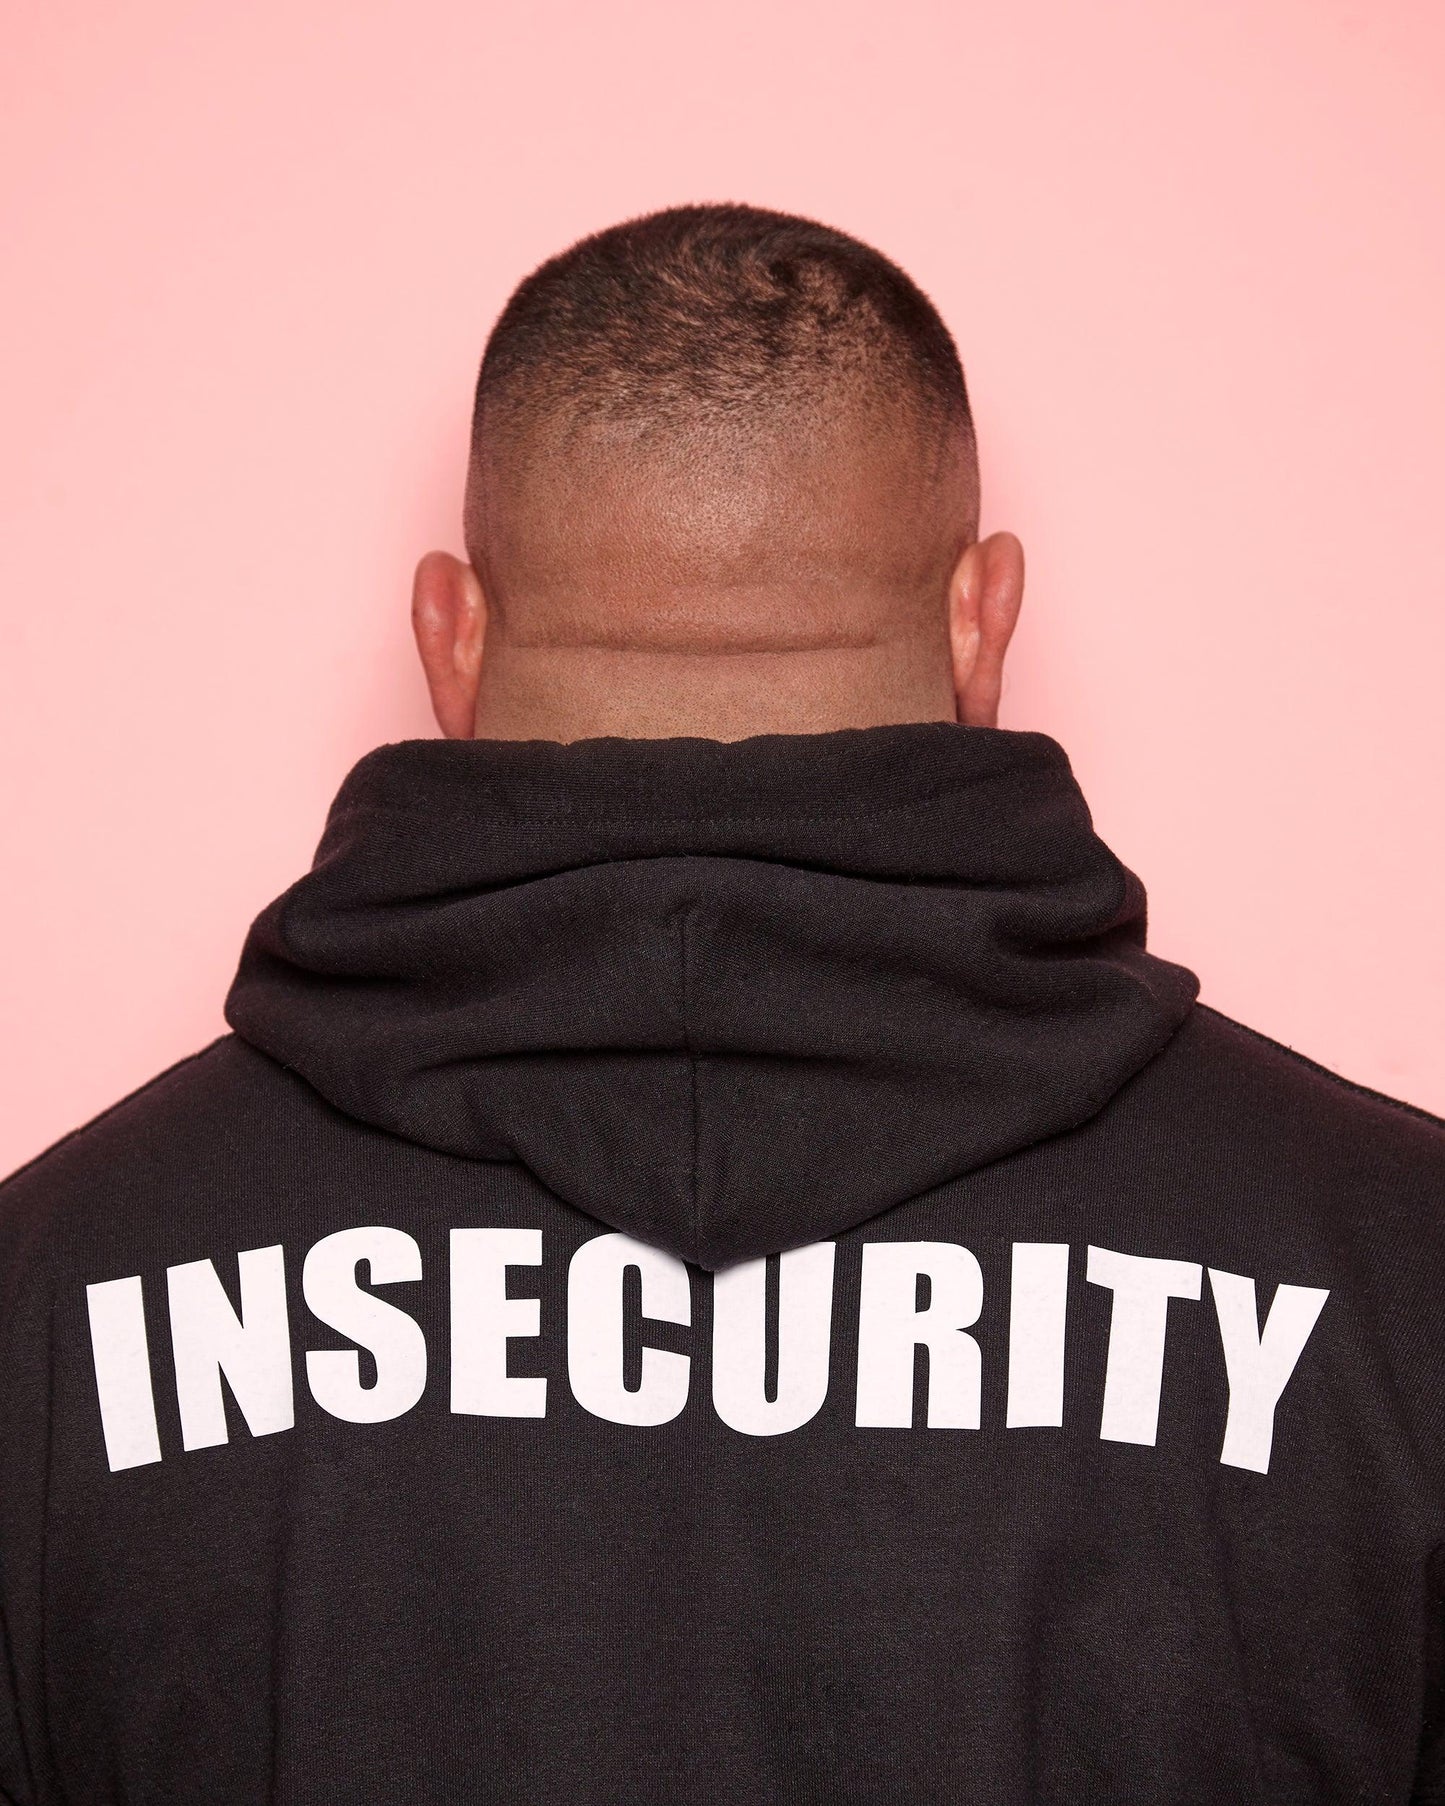 INSECURITY, white on black - pullover hoodie.